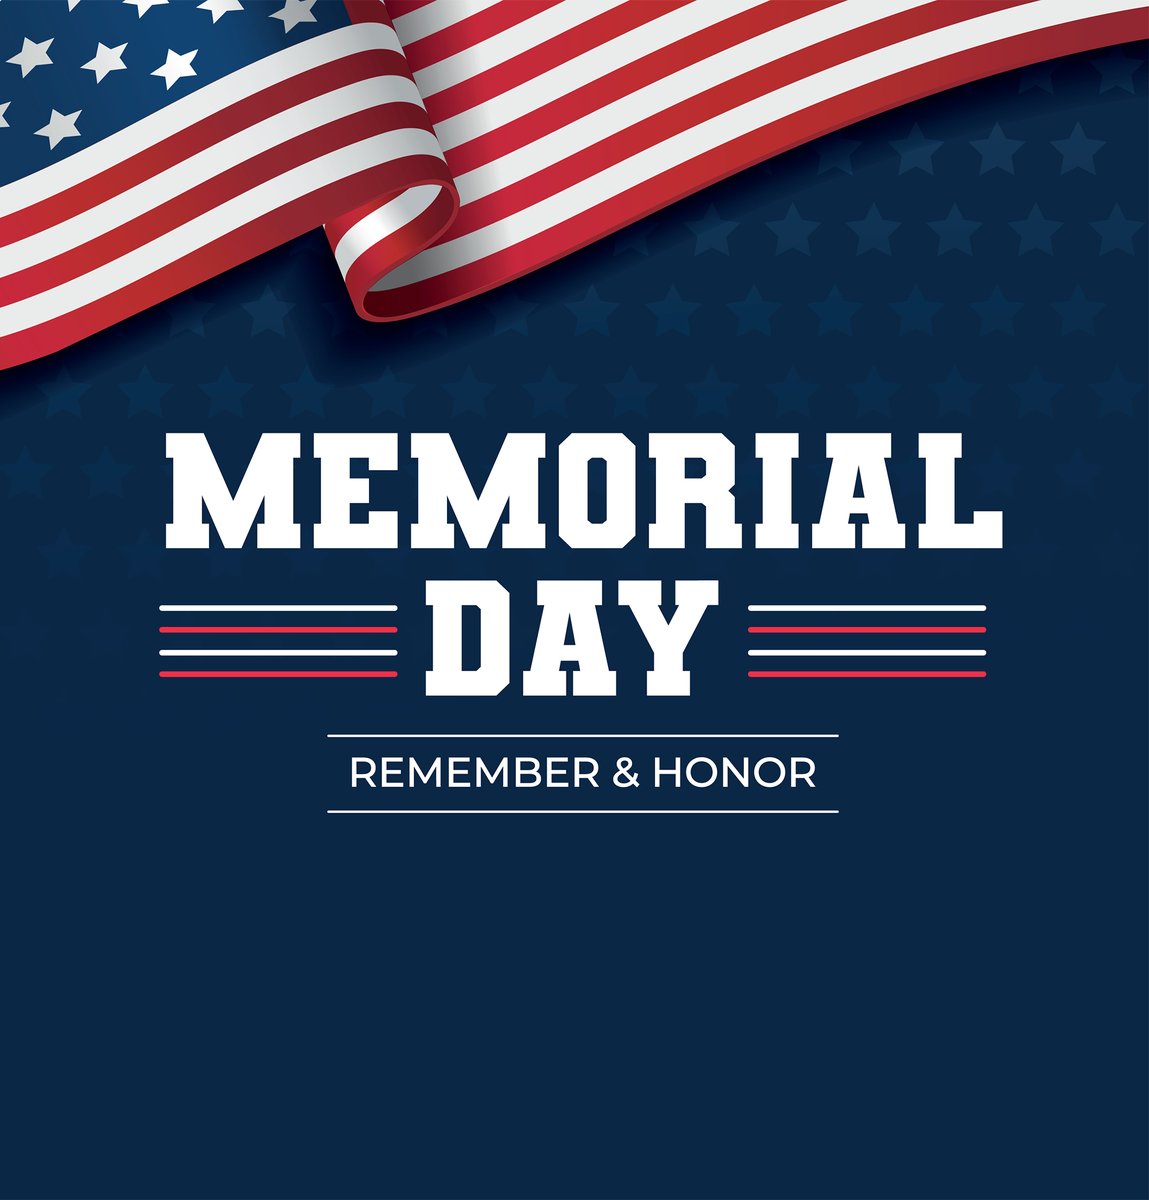 Our office is closed today in observance of Memorial Day. Visit sandiego.gov/holiday for a full list of holiday hours for City services and facilities.